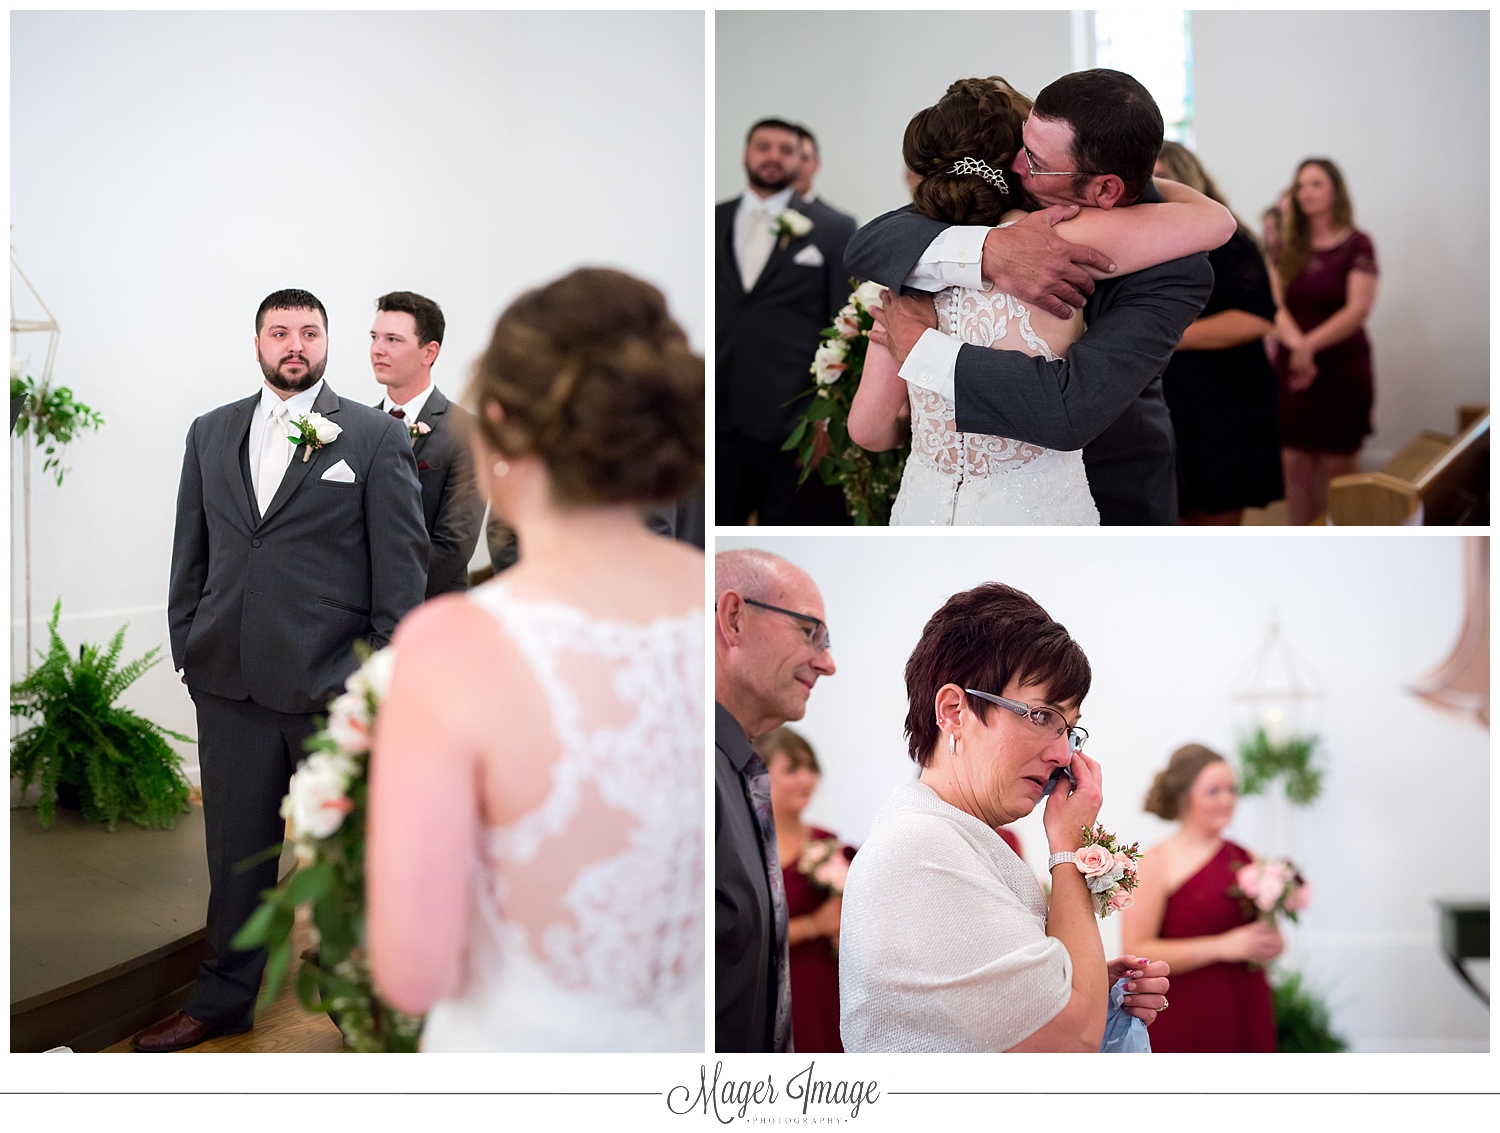 groom bride father dad mom mother guests crying hug embrace